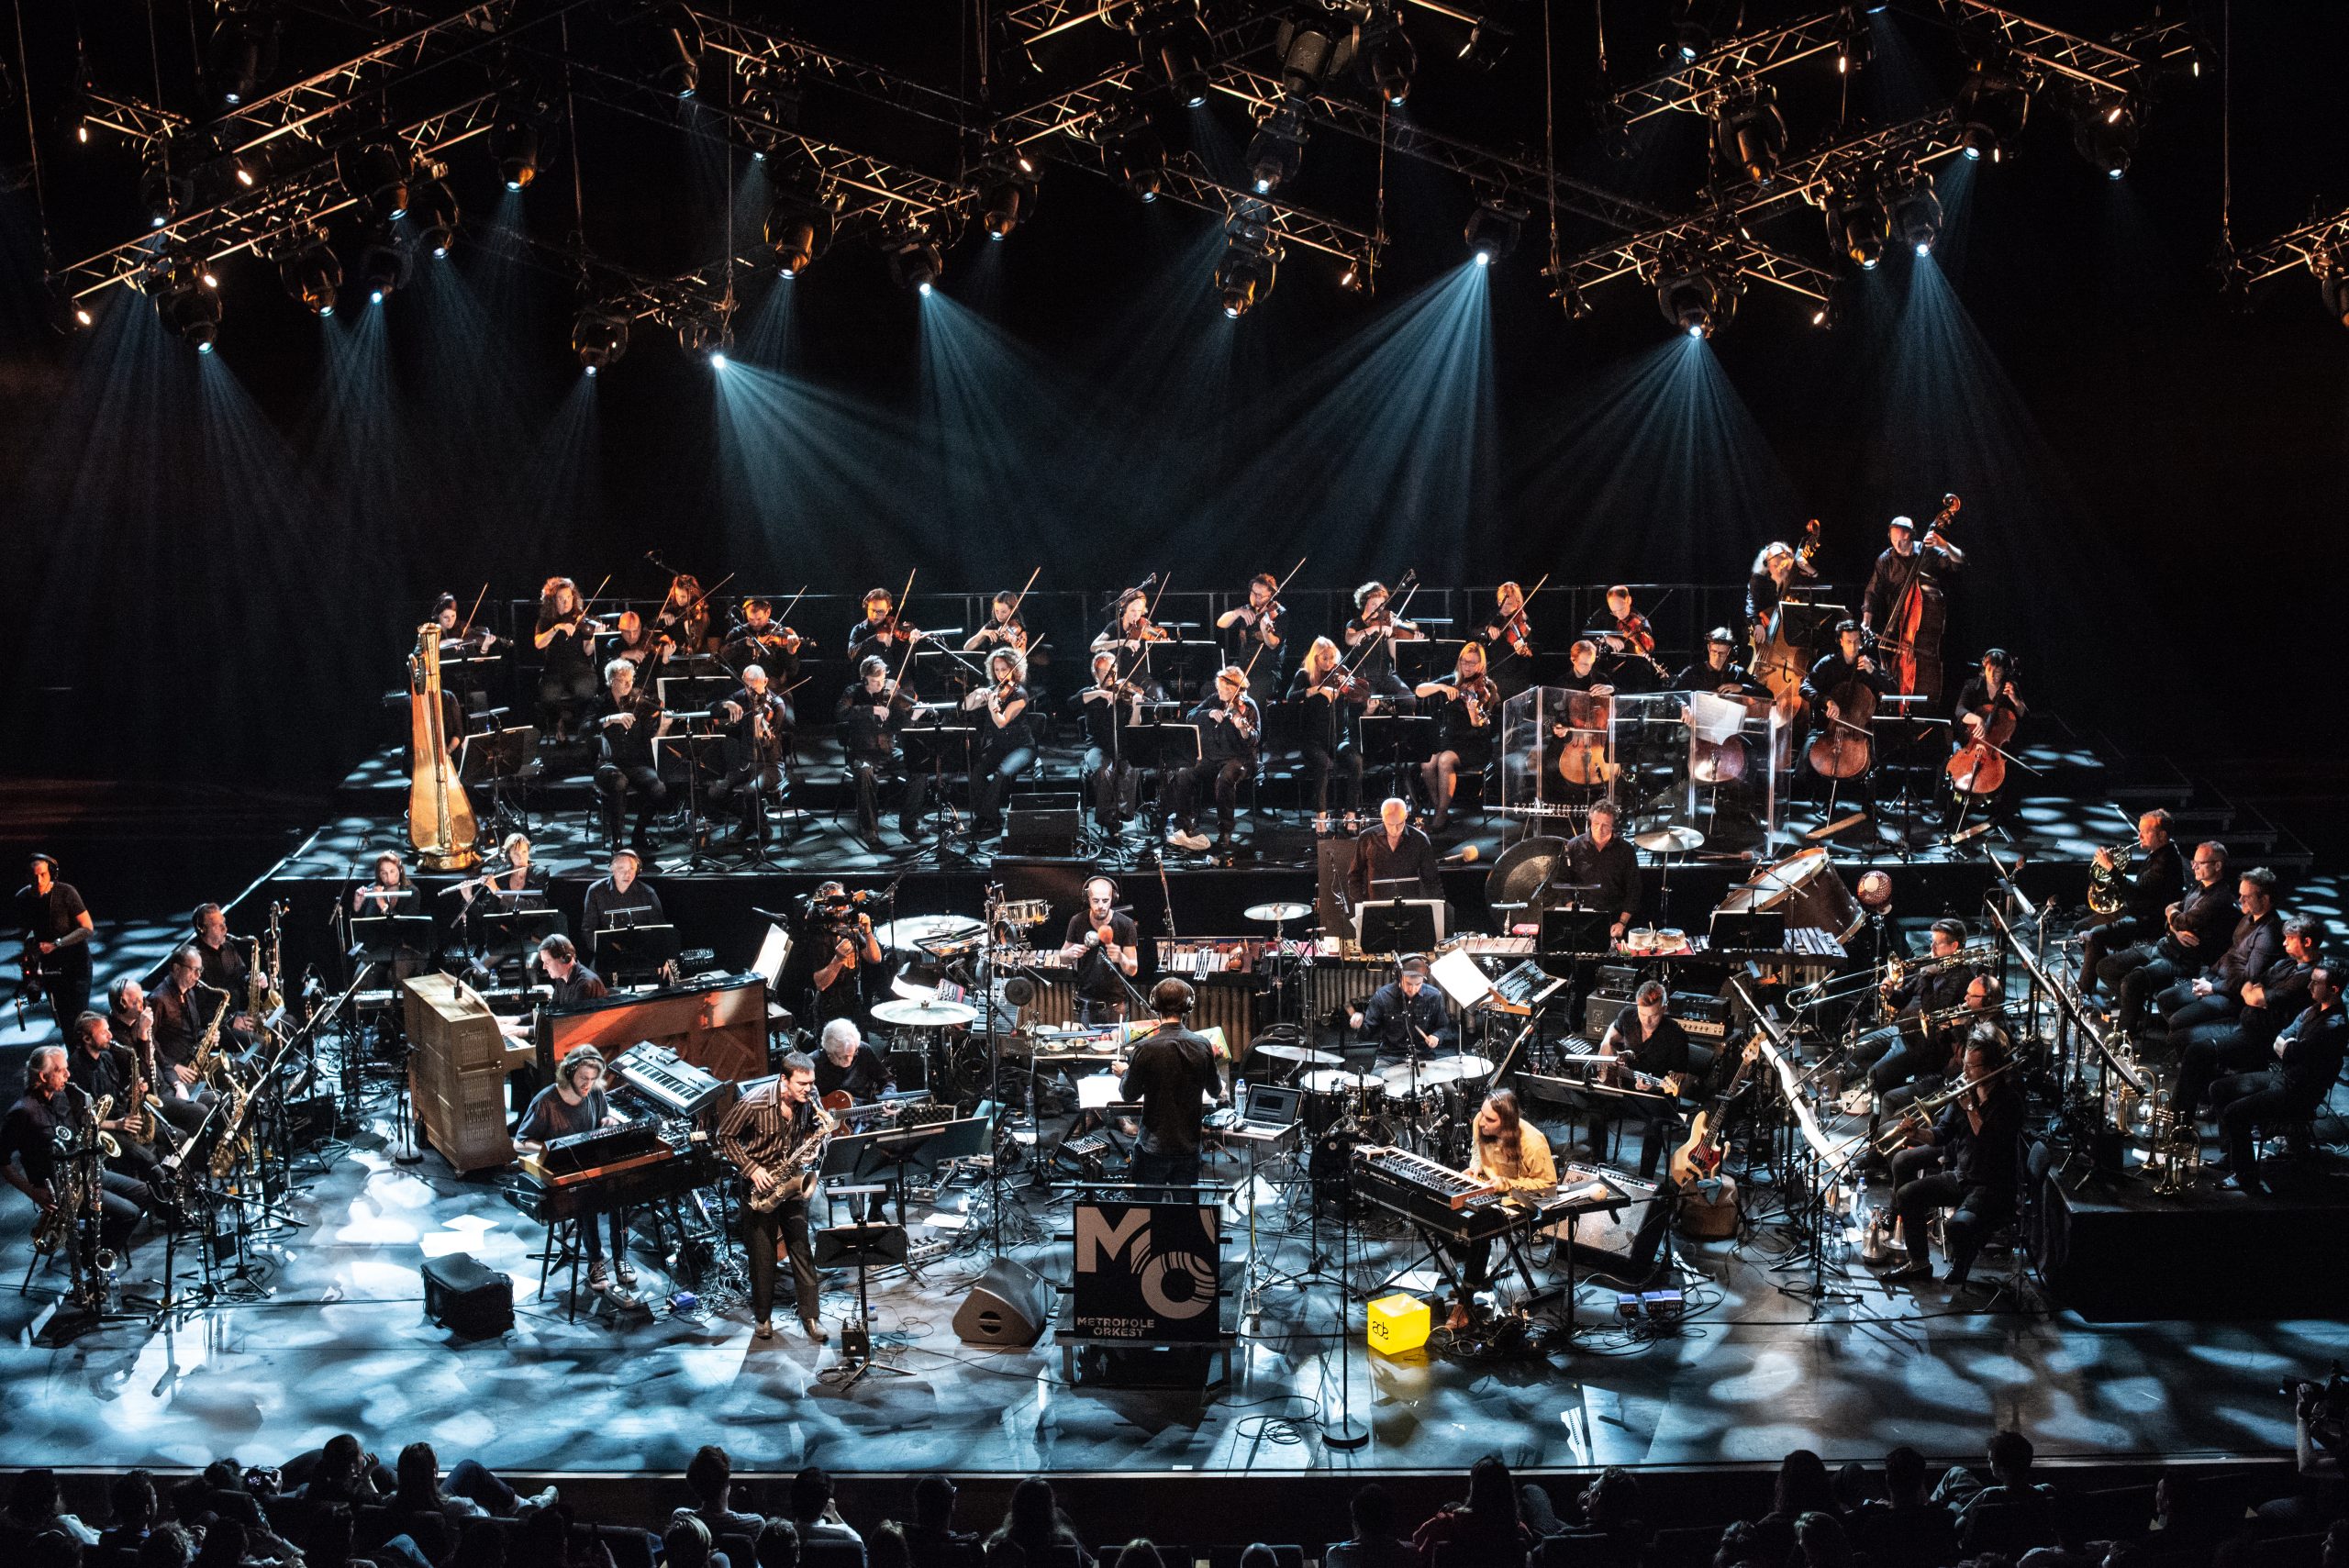 The festival reaches its halfway point with the main attraction, the Metropole Orkest & Kandace Springs